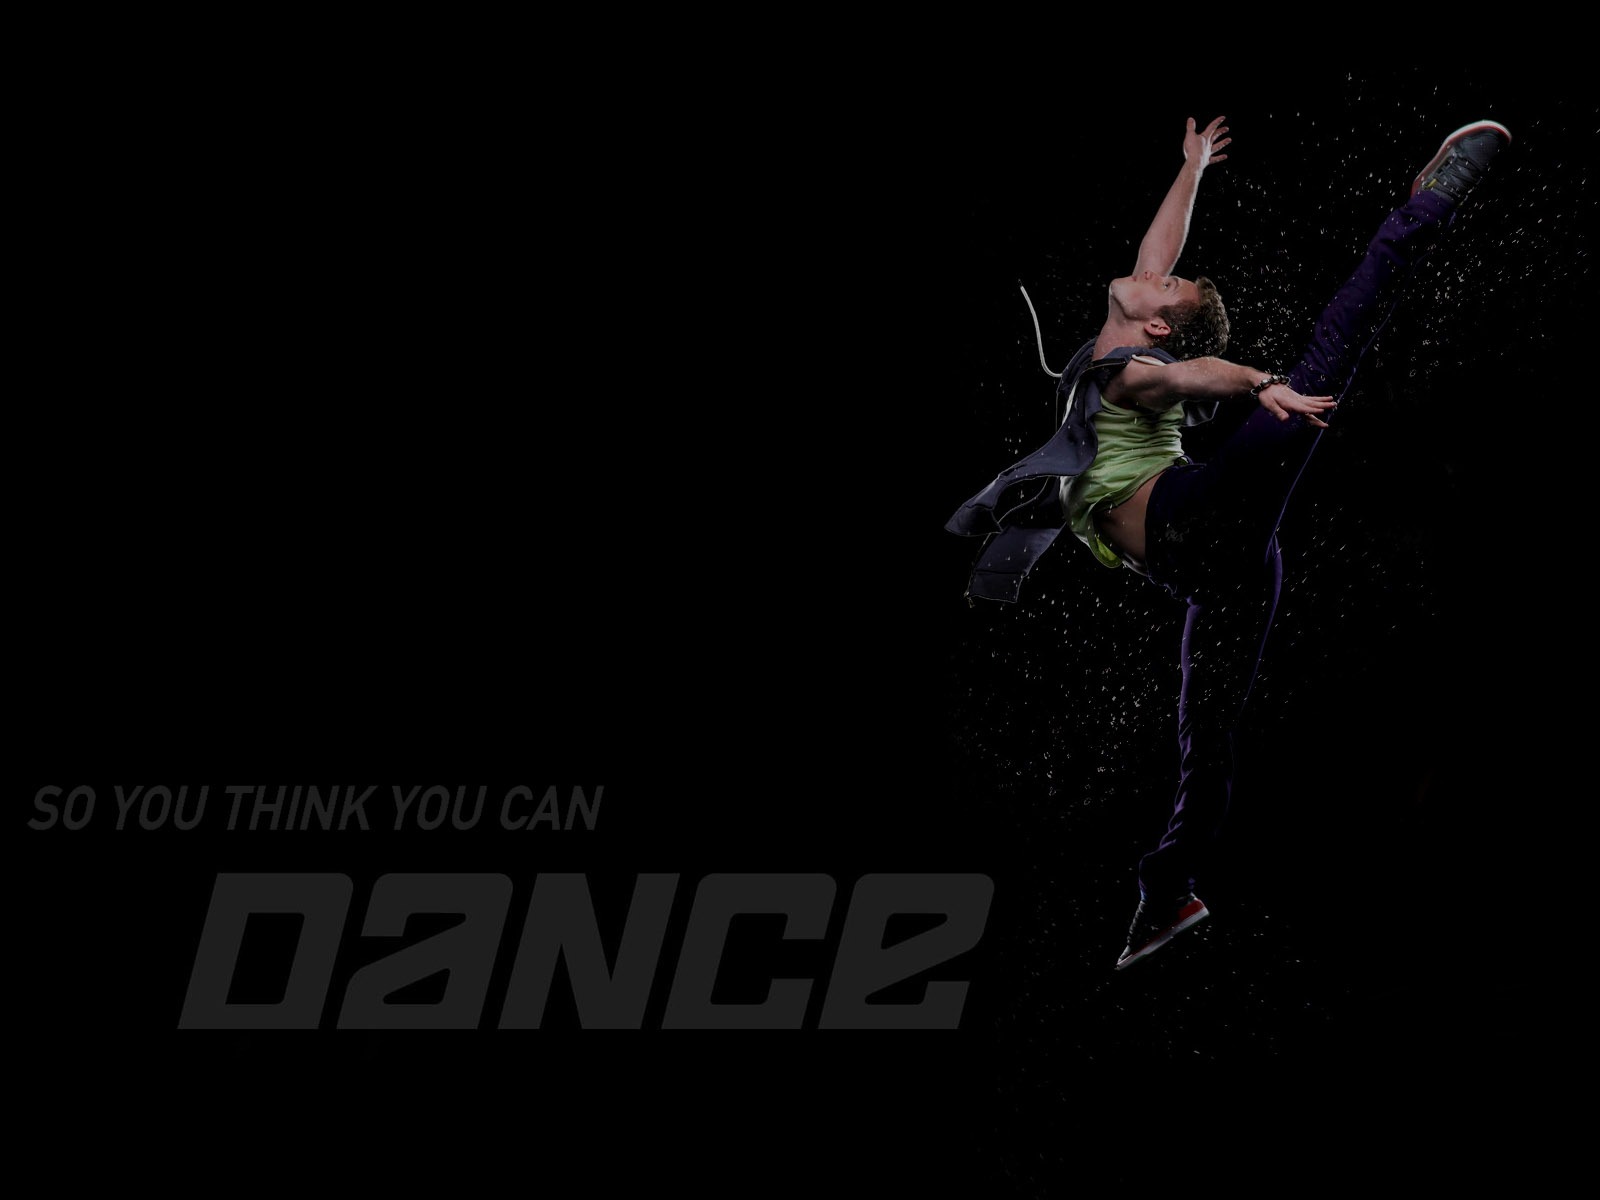 So You Think You Can Dance 舞林爭霸壁紙(二) #8 - 1600x1200